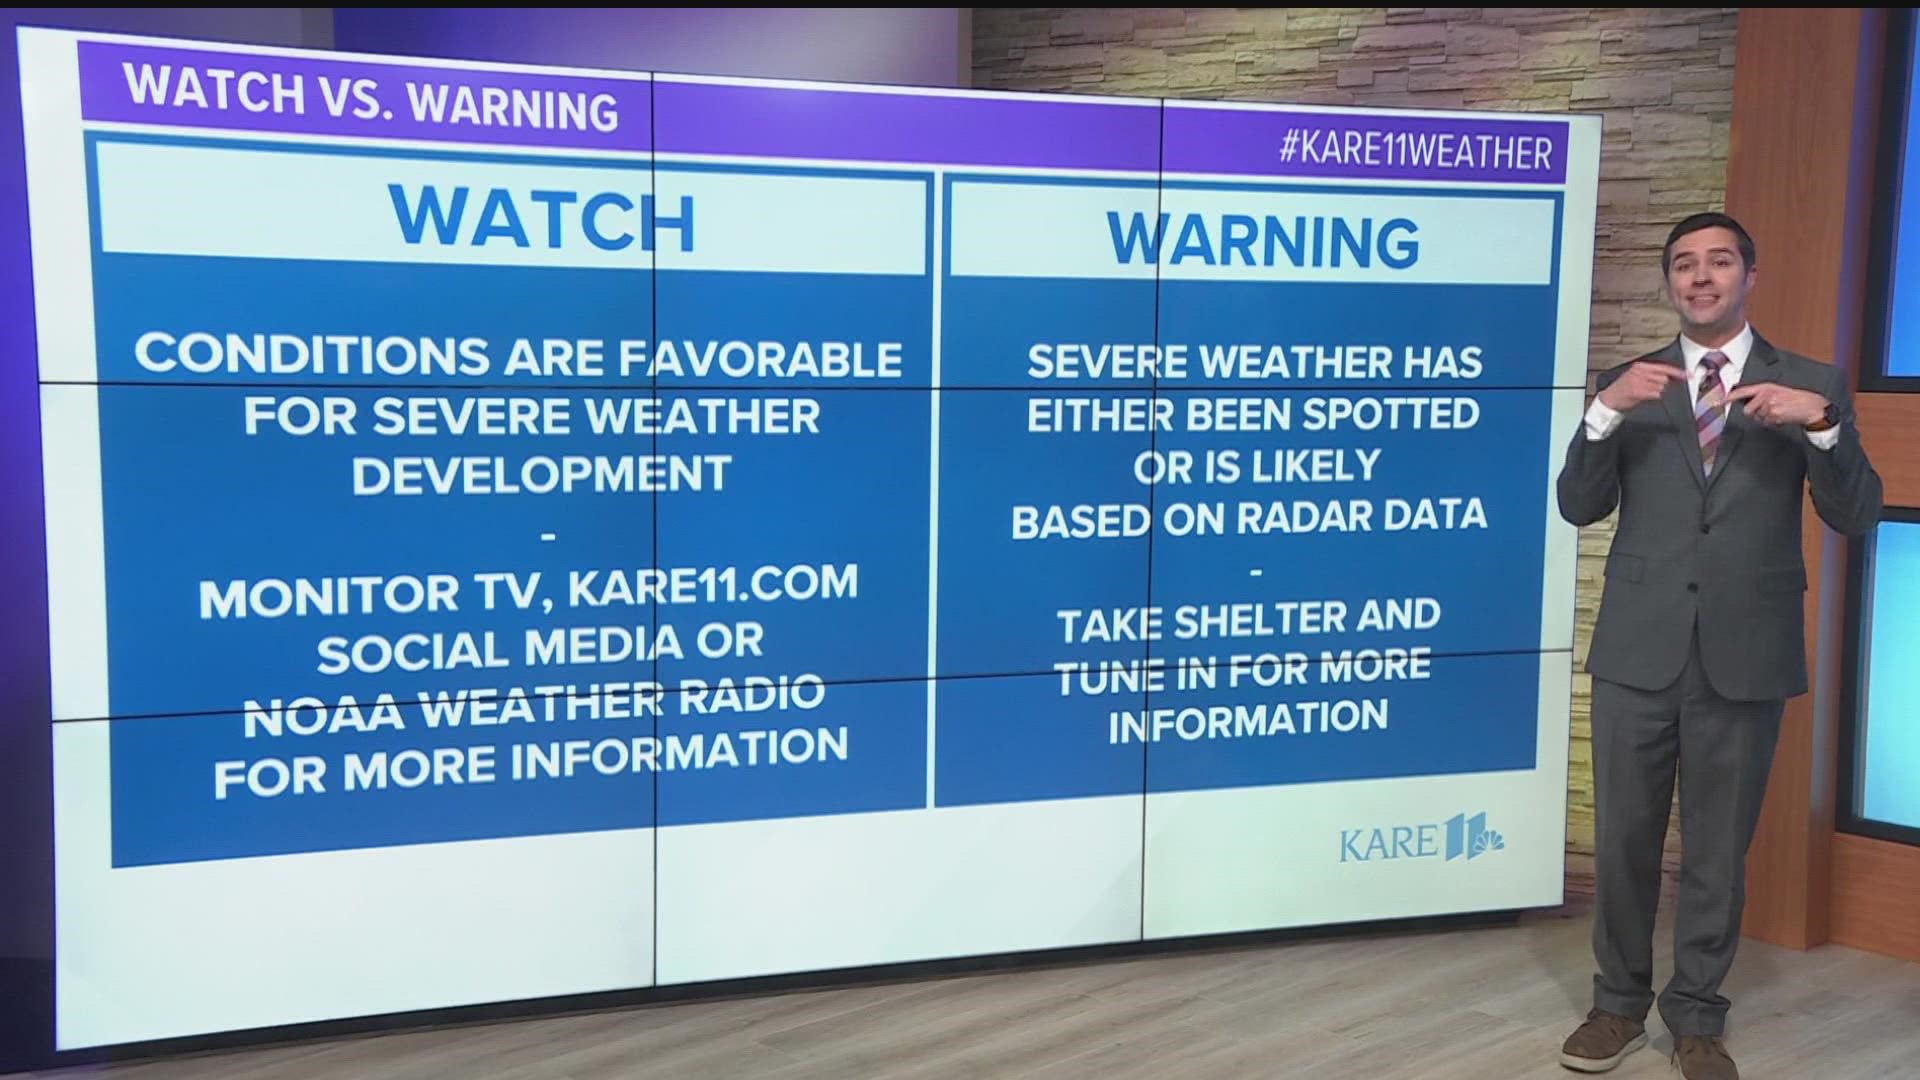 KARE 11 Meteorologist Ben Dery explains the differences between watches and warnings and how baking a cake is an easy way to remember the differences.